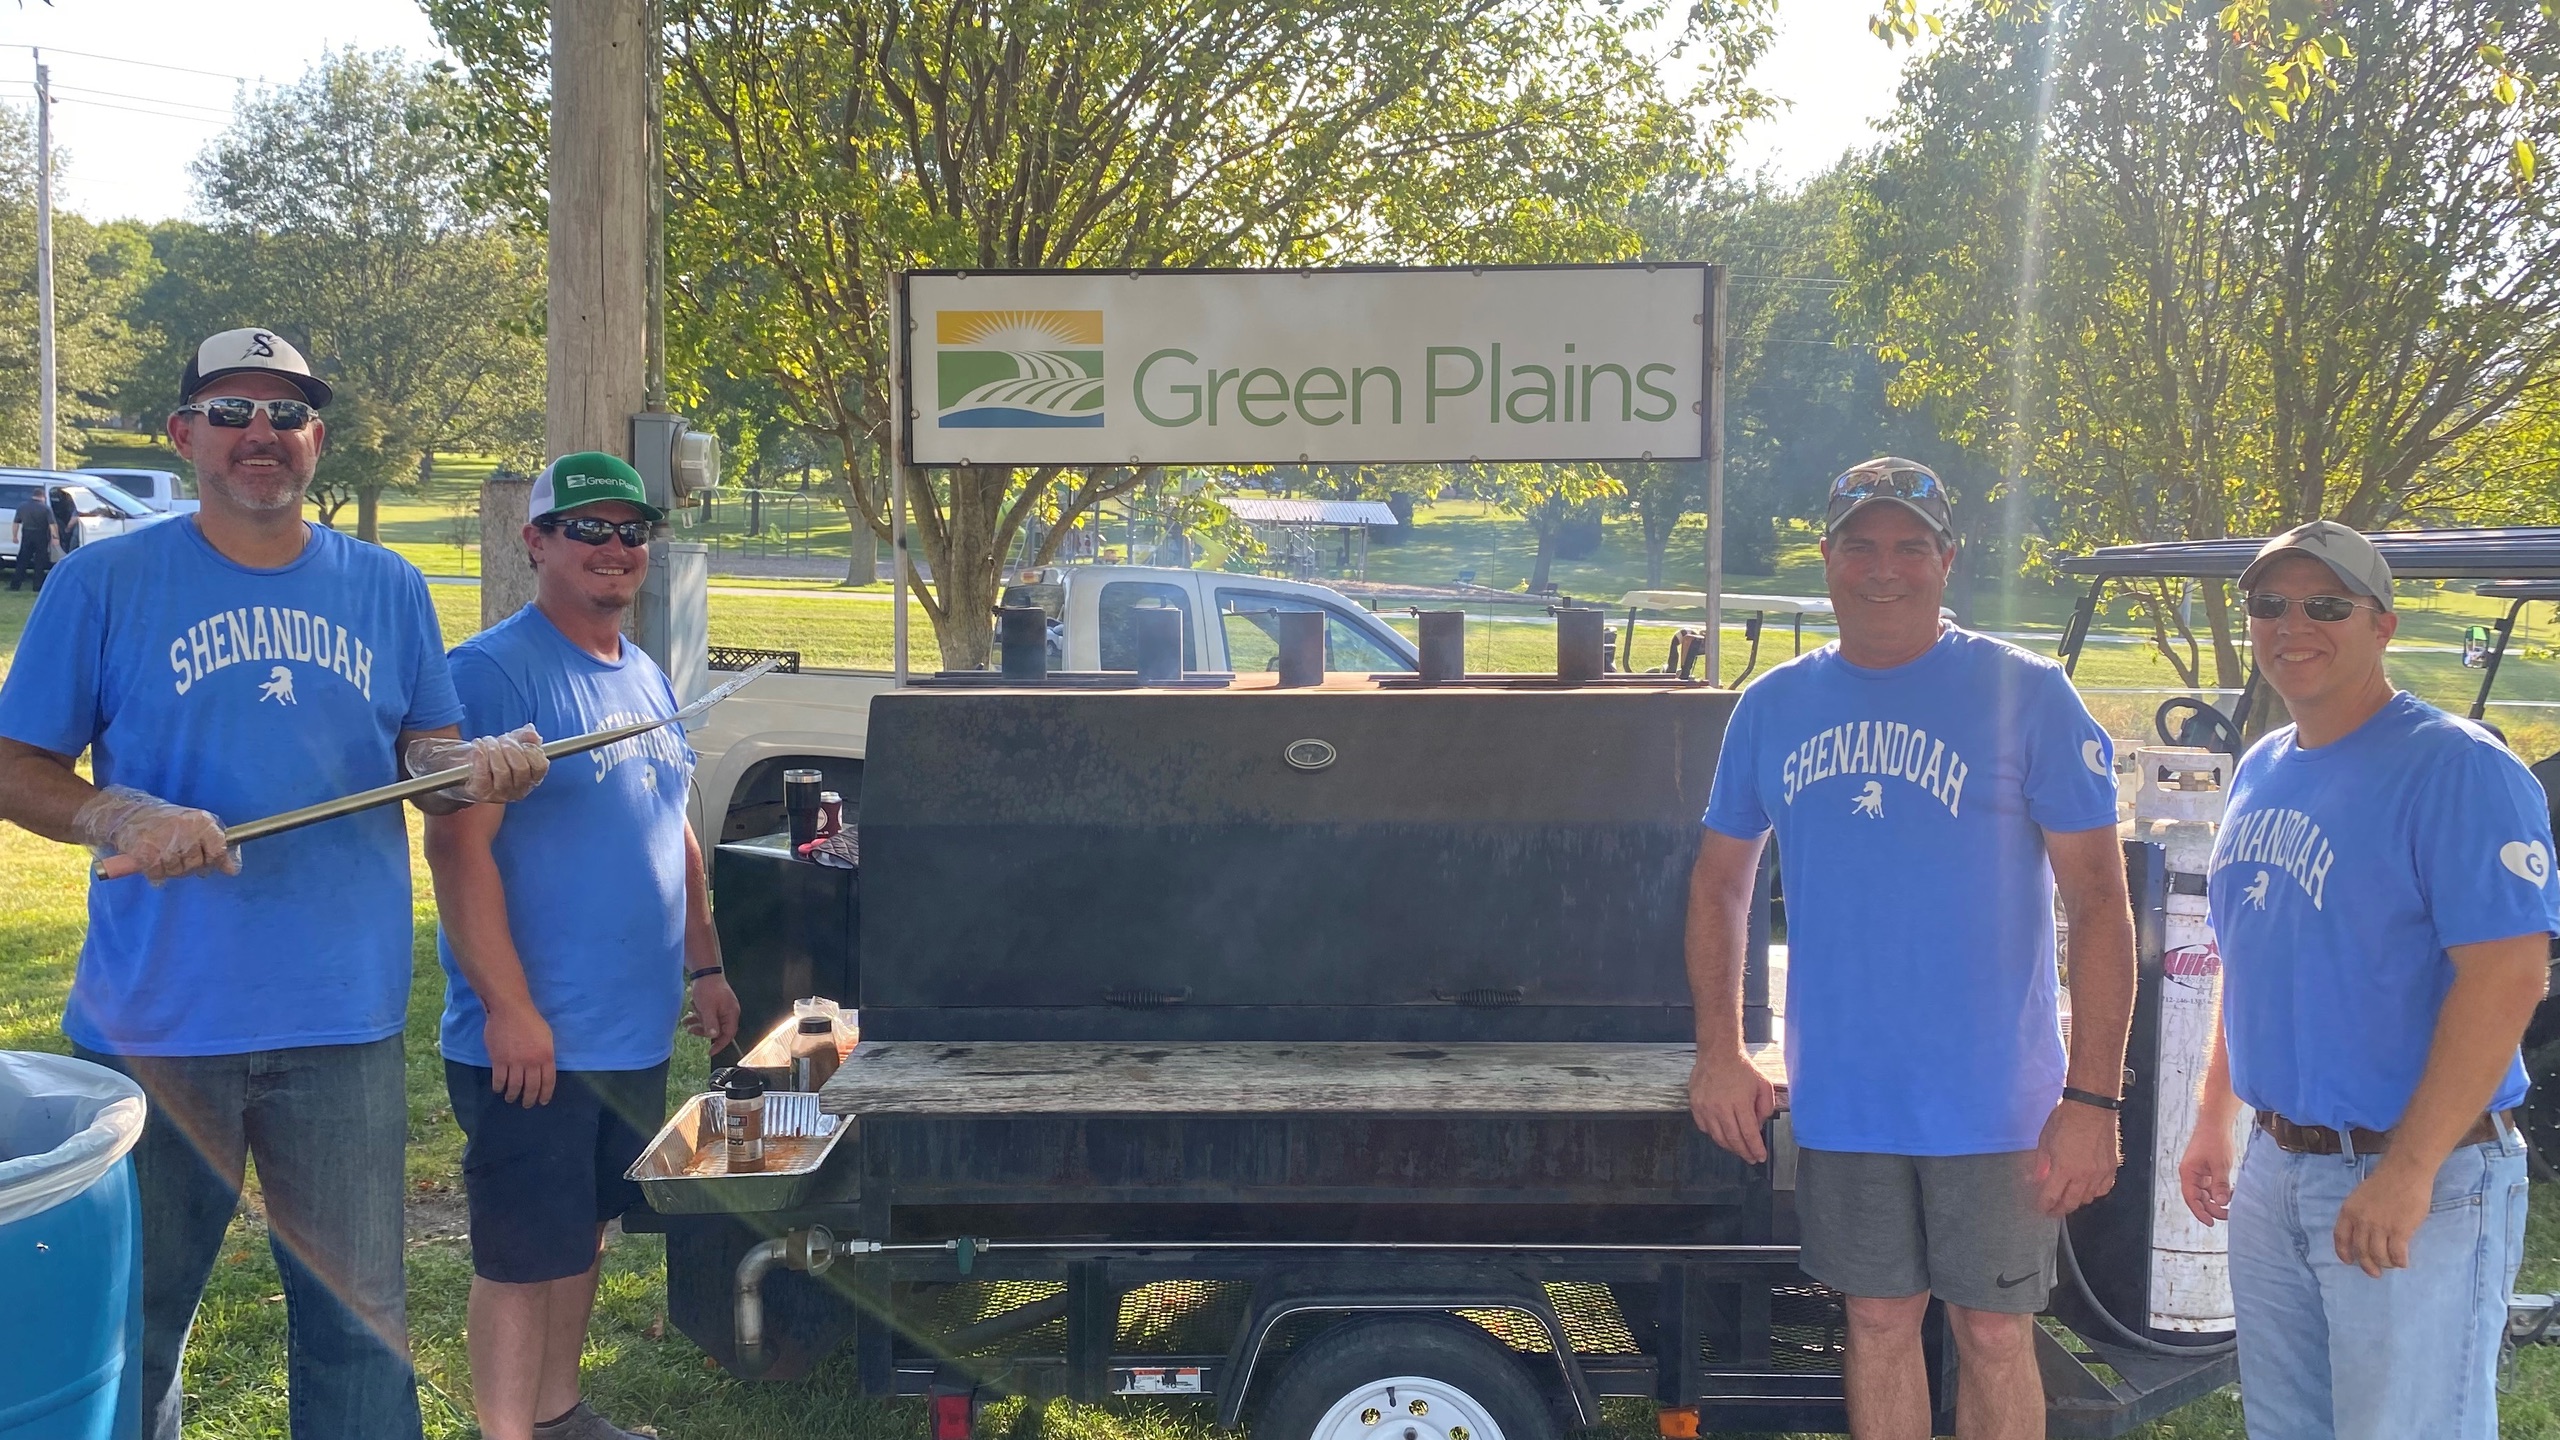 A Green Plains branded grill accompanied by the cookout grill masters